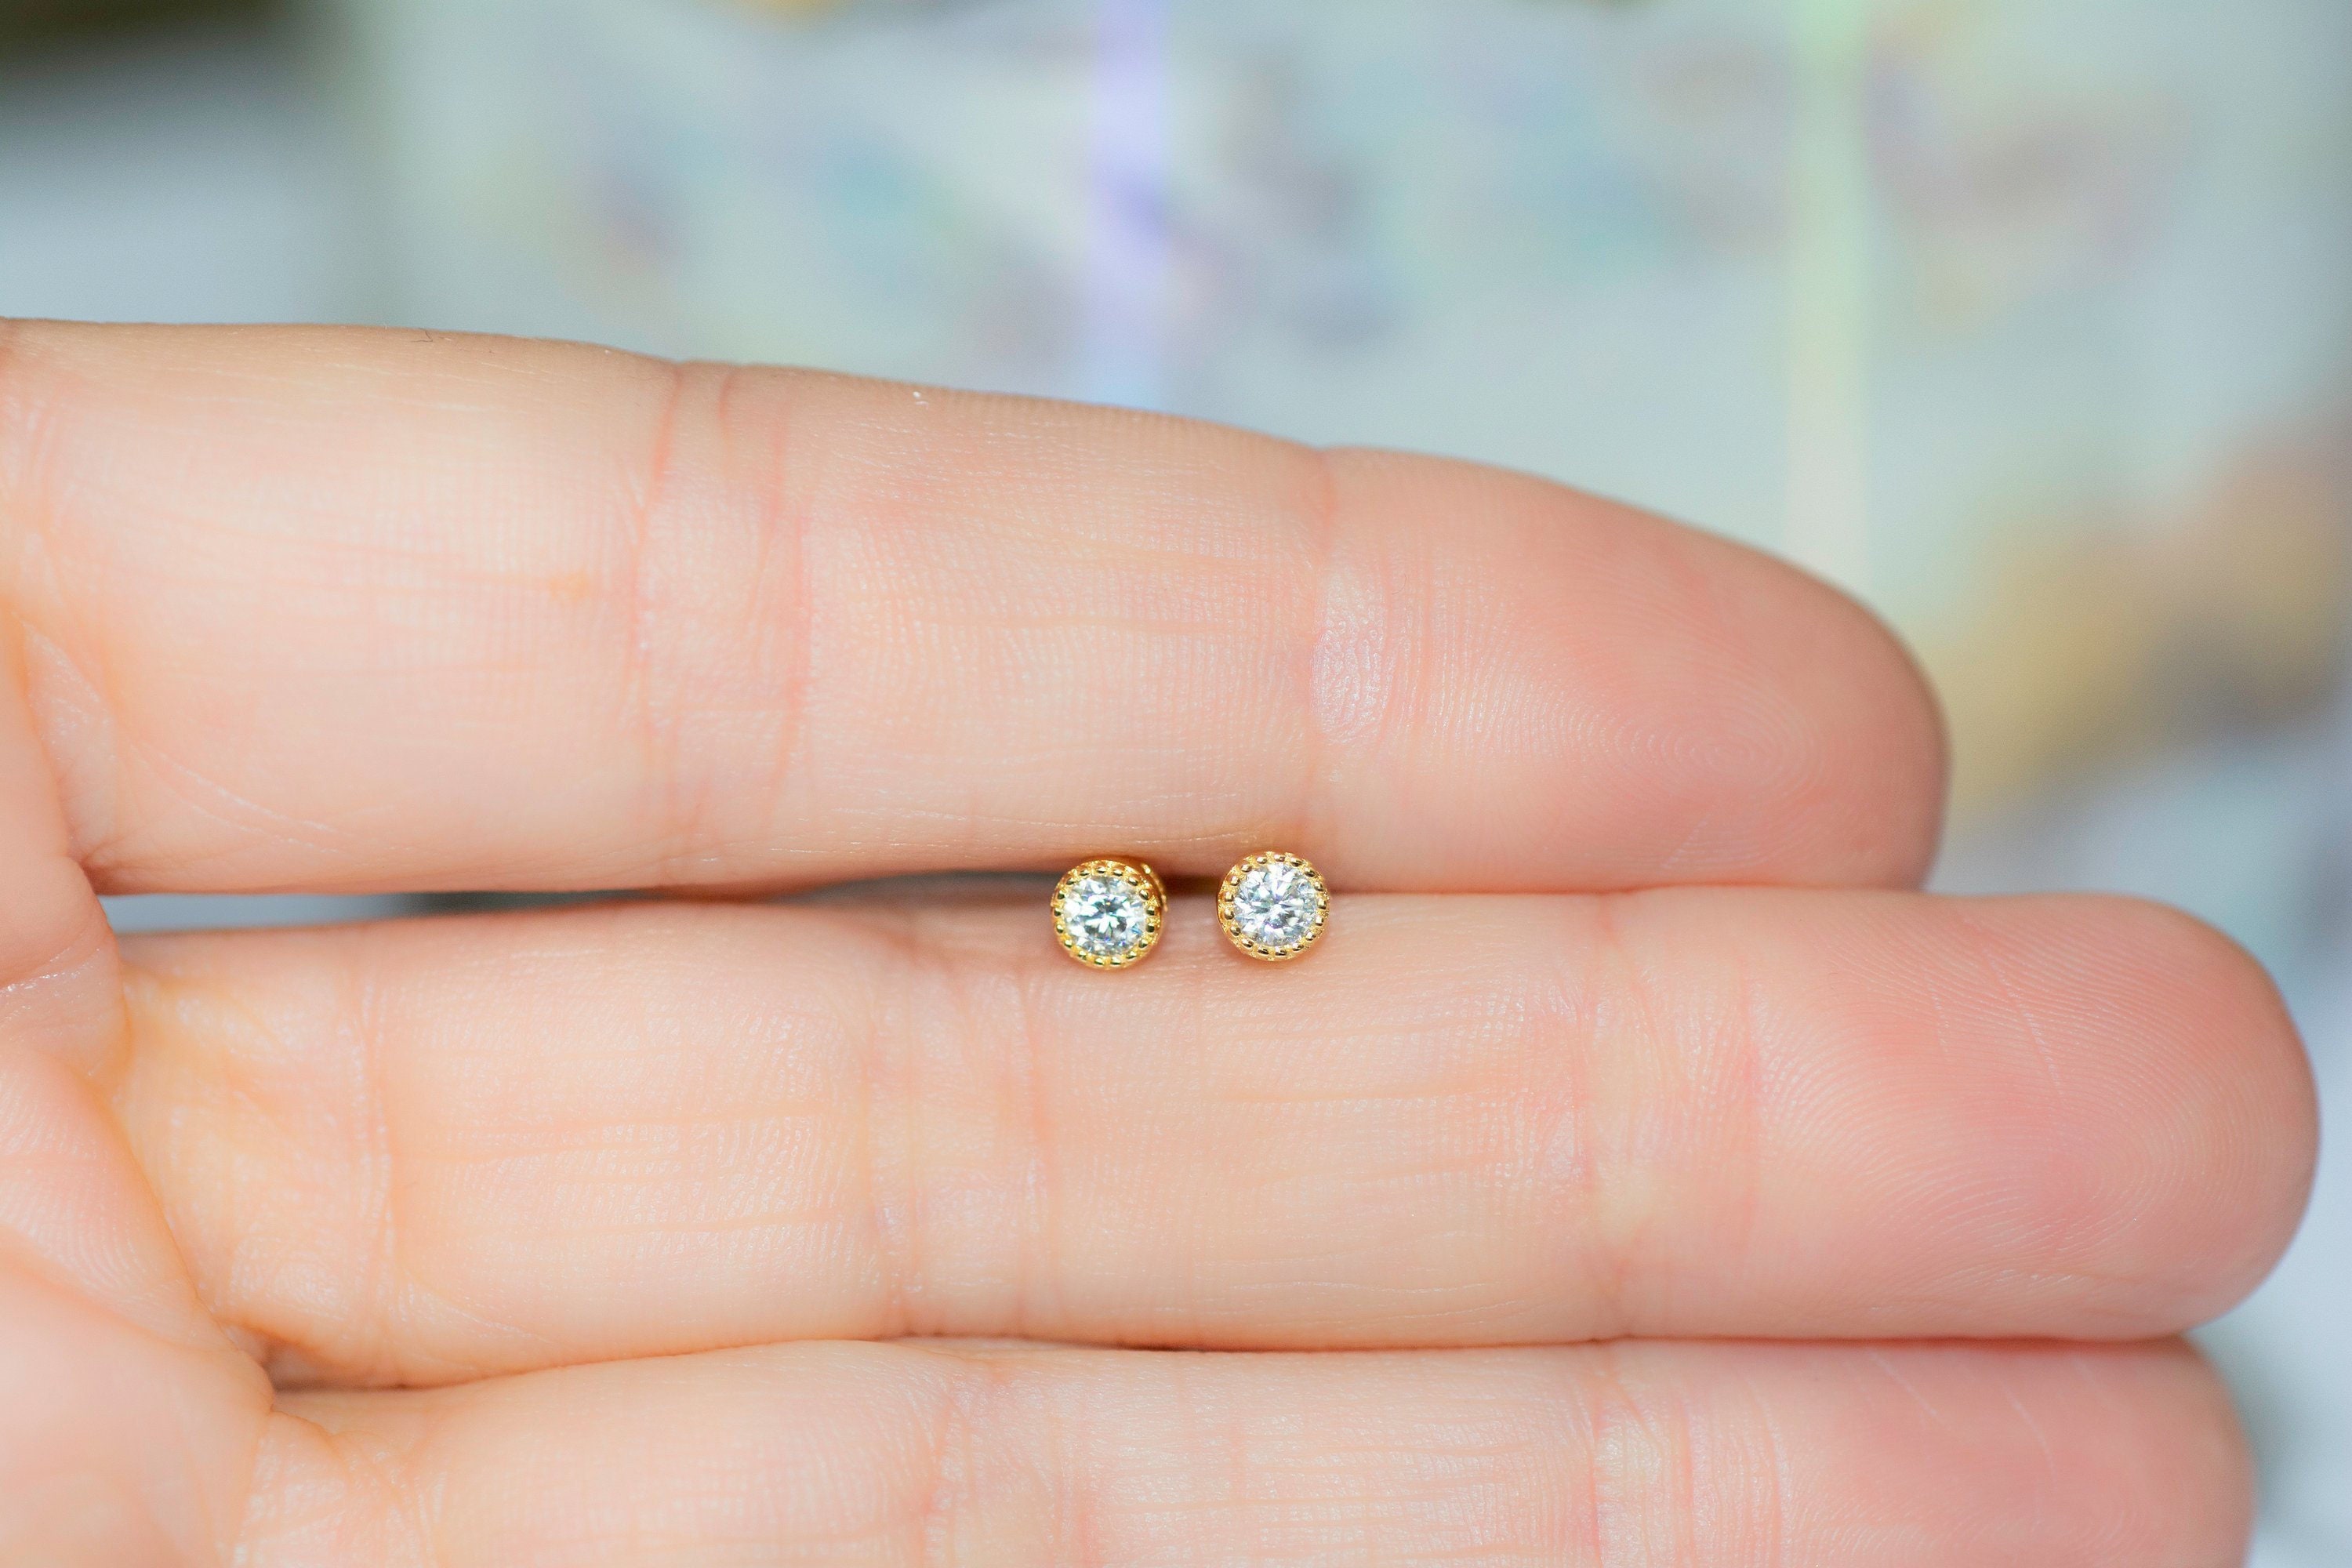  Everyday Gold Filled CZ Diamond Stud Earrings - Tiny Wedding  Zircon Post Earrings for Bride and Bridesmaid - Size 3mm : Handmade Products